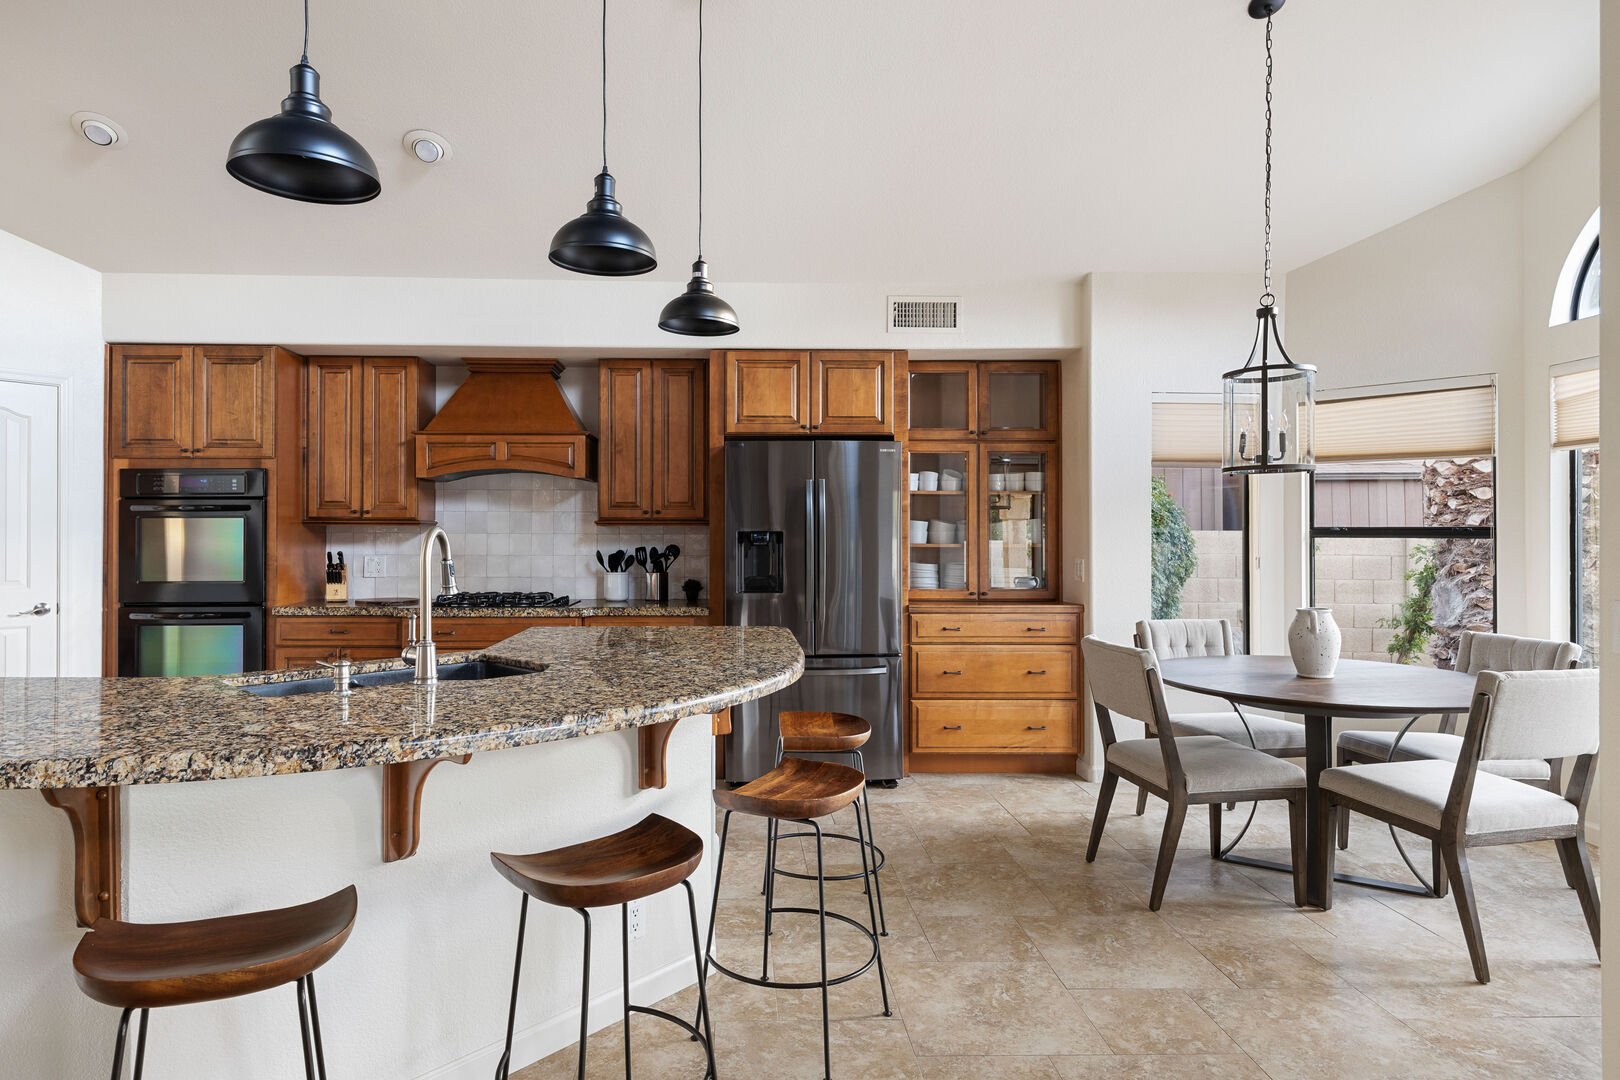 Expansive kitchen with arched countertop. Barstool seating for 4.